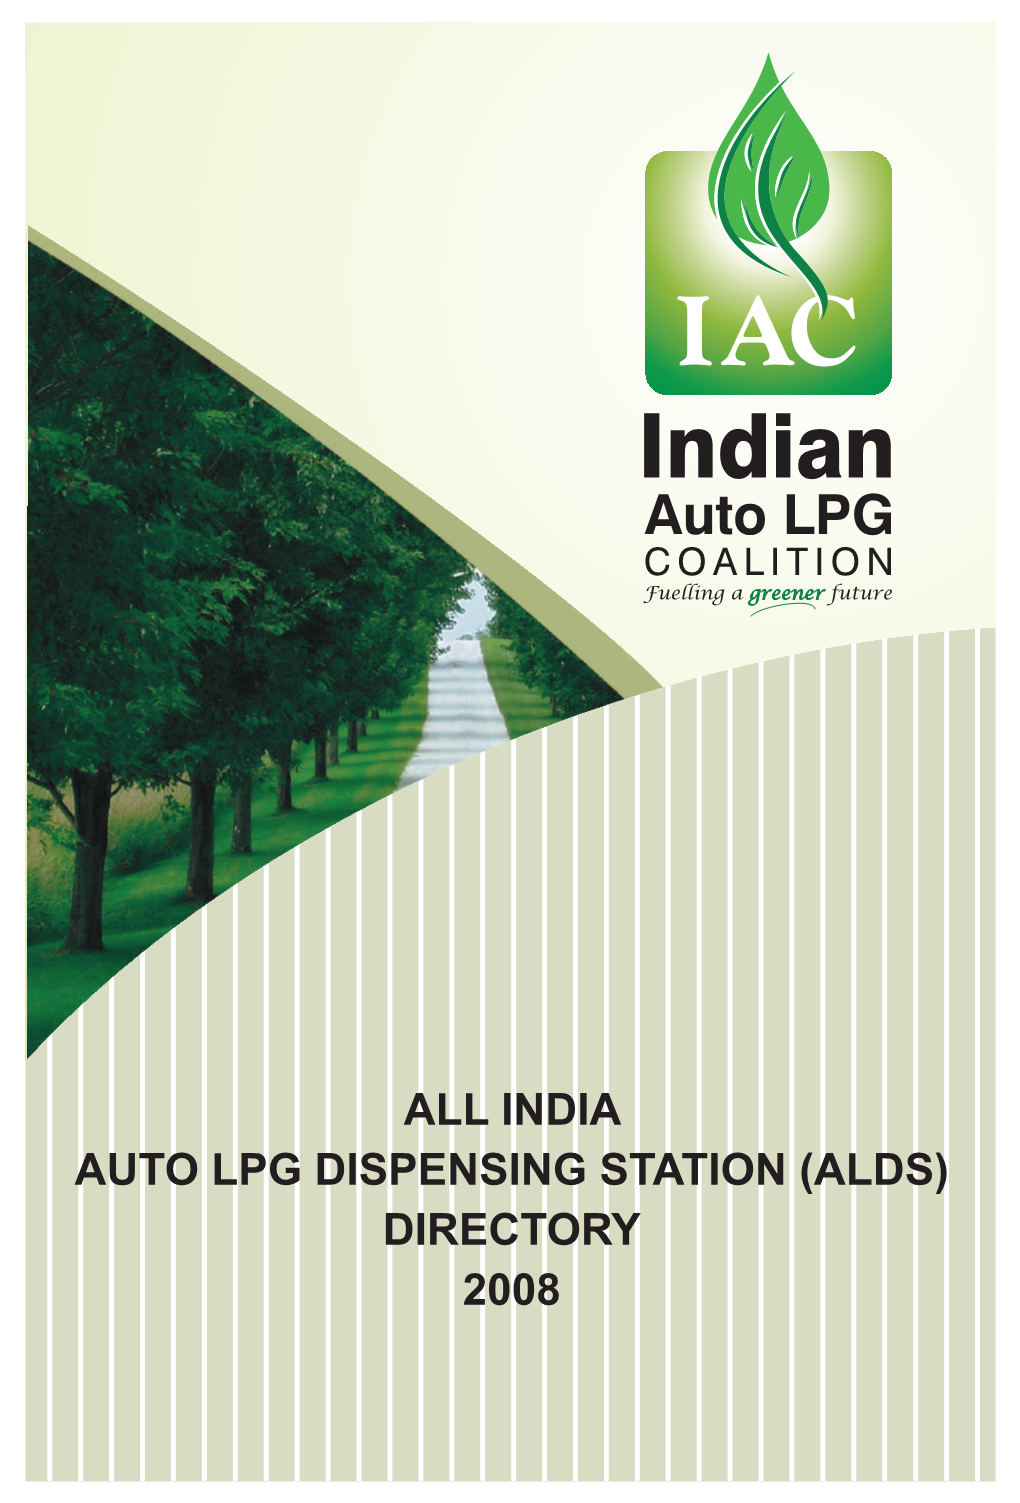 All India Auto Lpg Dispensing Station (Alds) Directory 2008